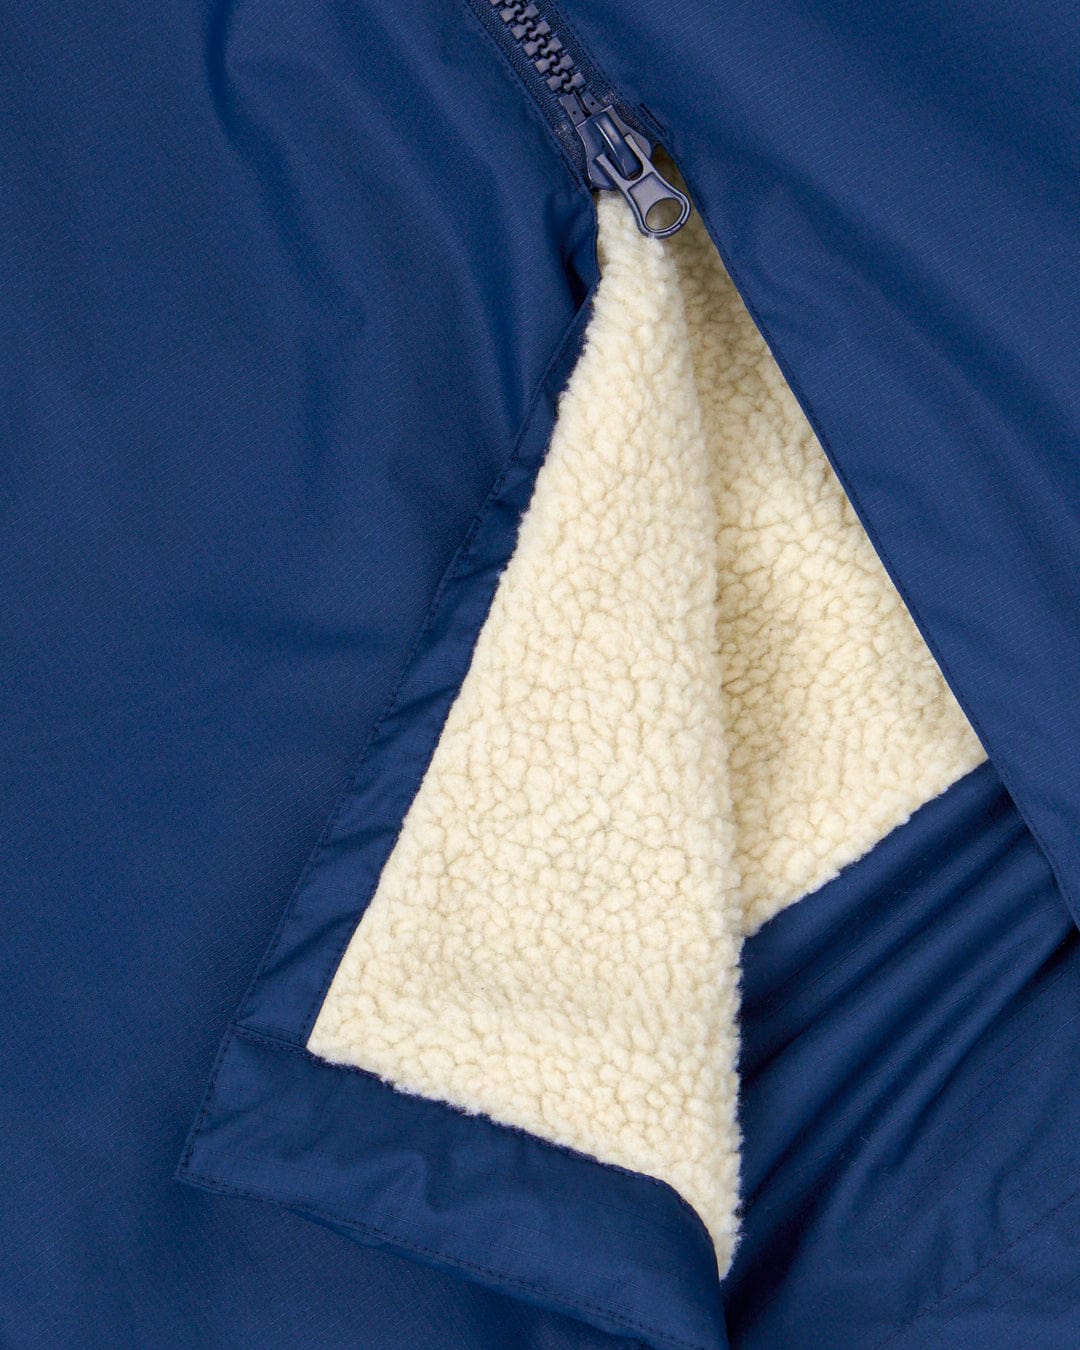 A partially unzipped Saltrock blue jacket revealing a white fleece lining made from recycled material.